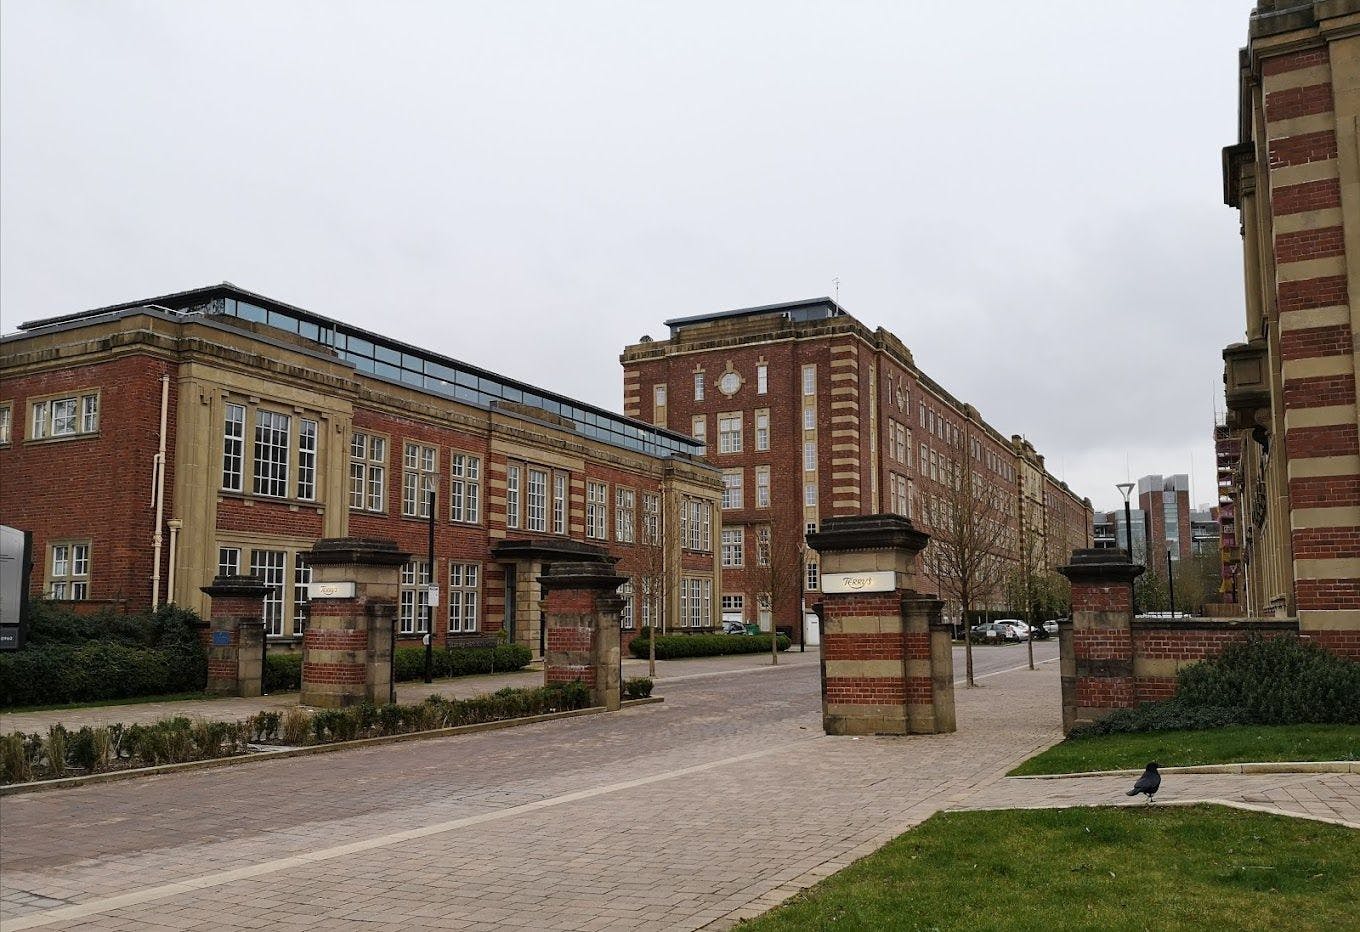 Exterior of Chocolate Works care village in York, Yorkshire